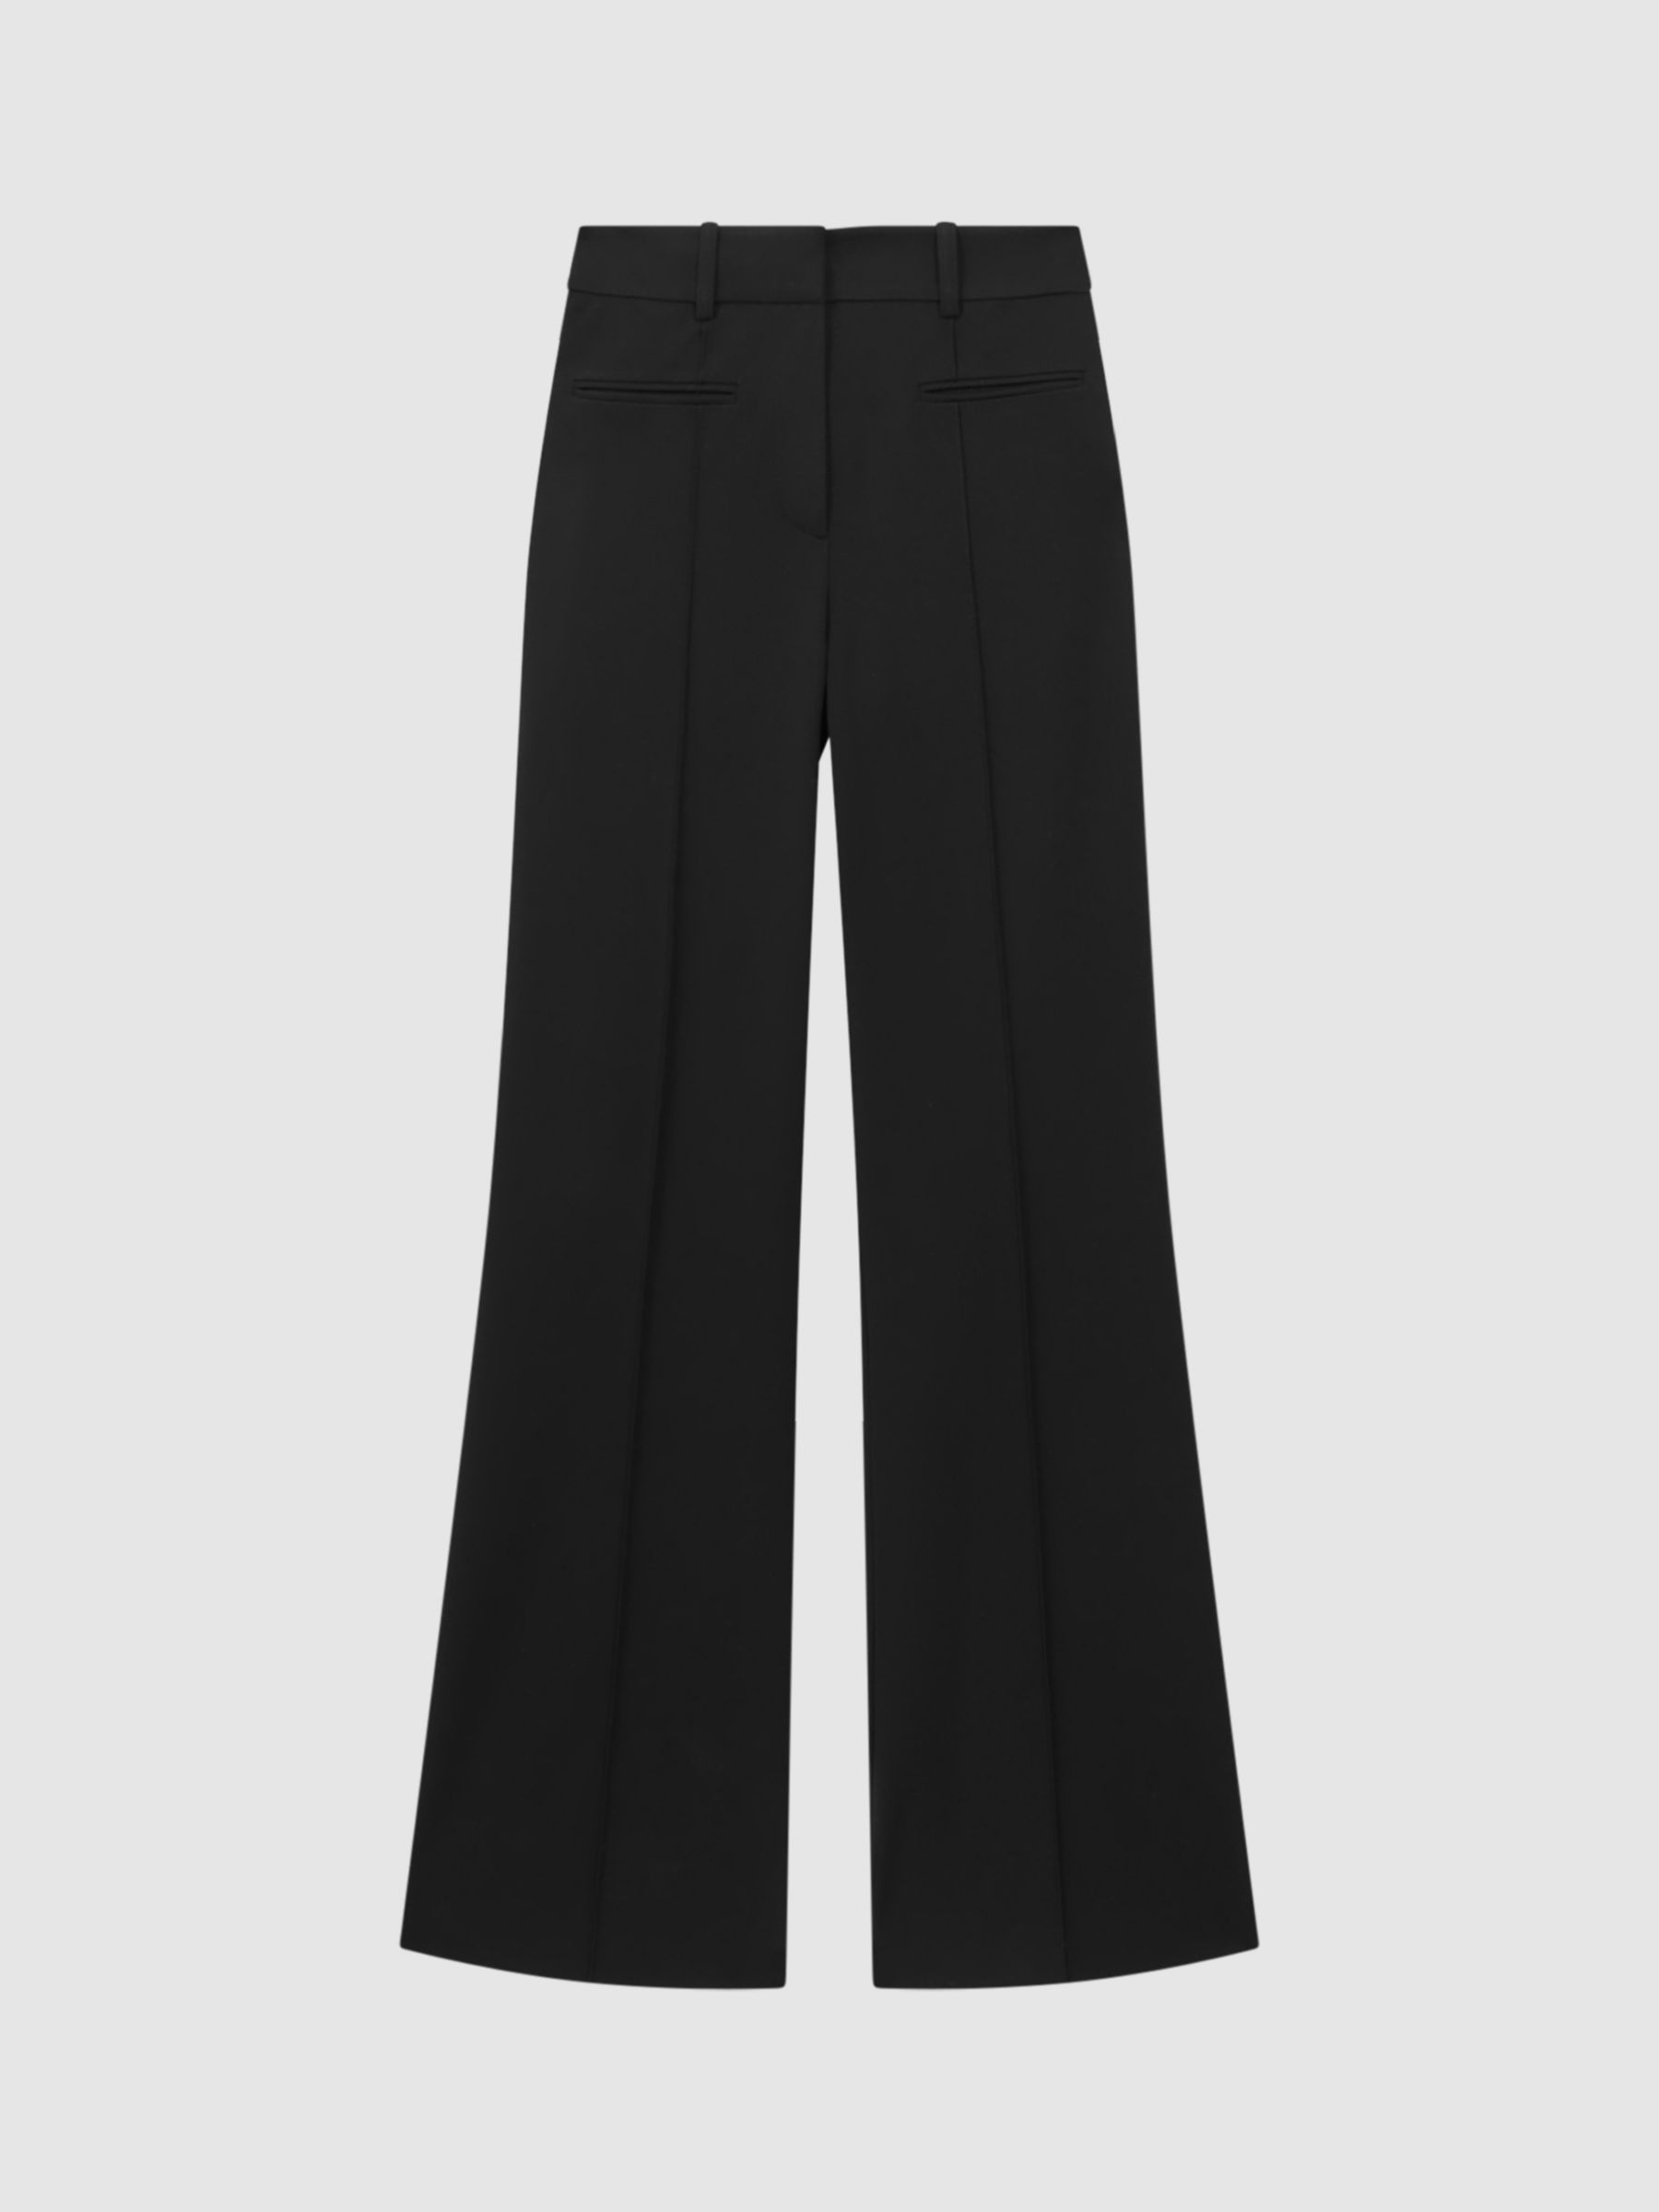 Reiss Claude Flared Tailored Trousers, Black at John Lewis & Partners